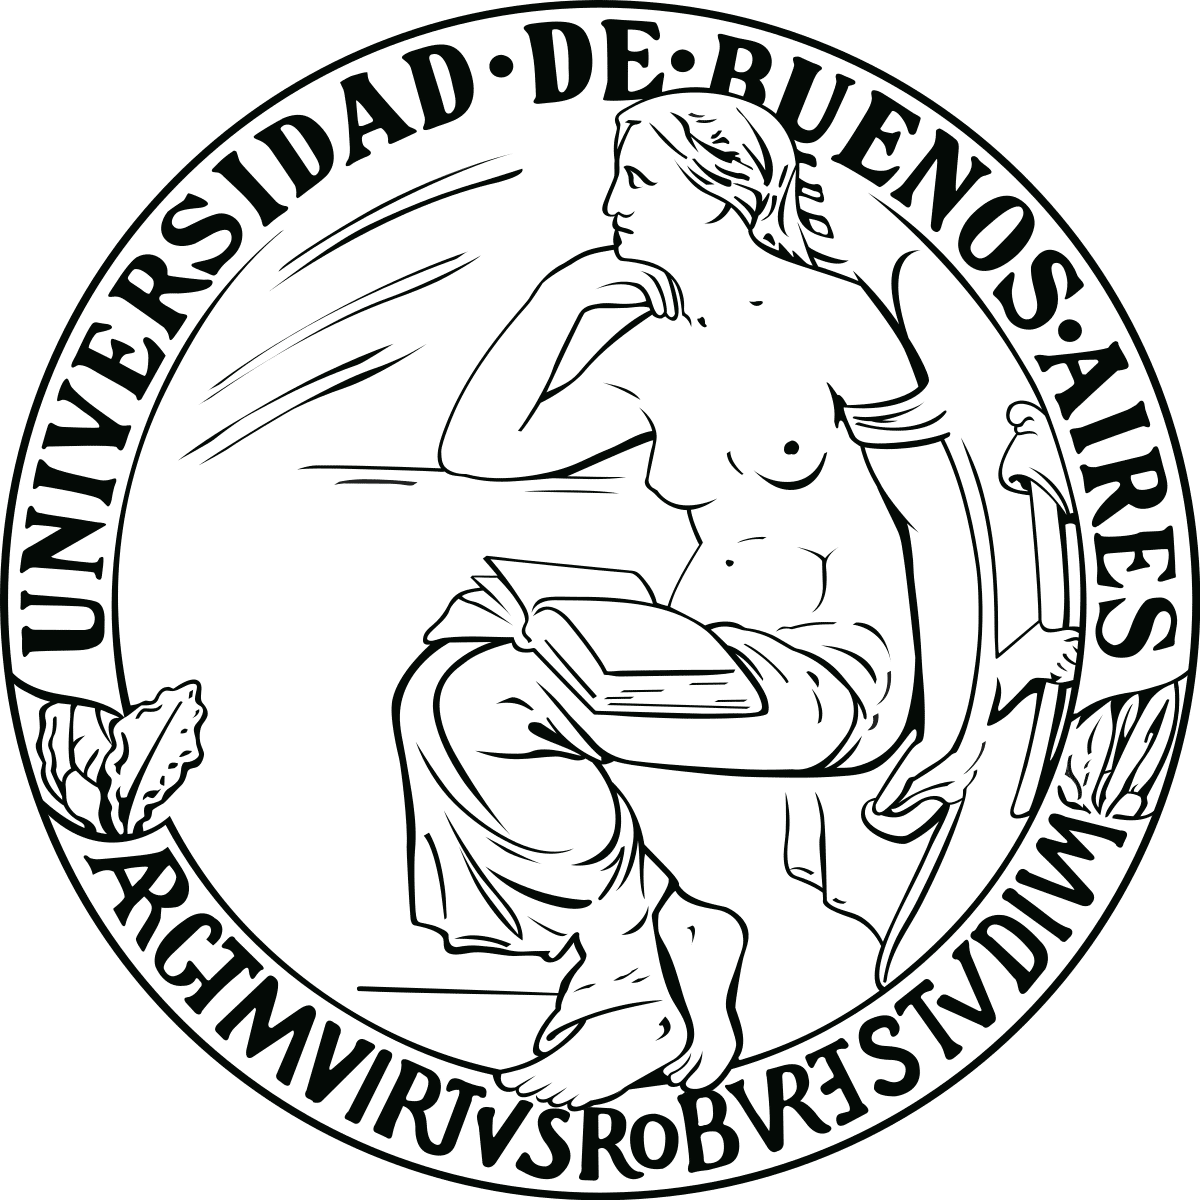 University of Buenos Aires's